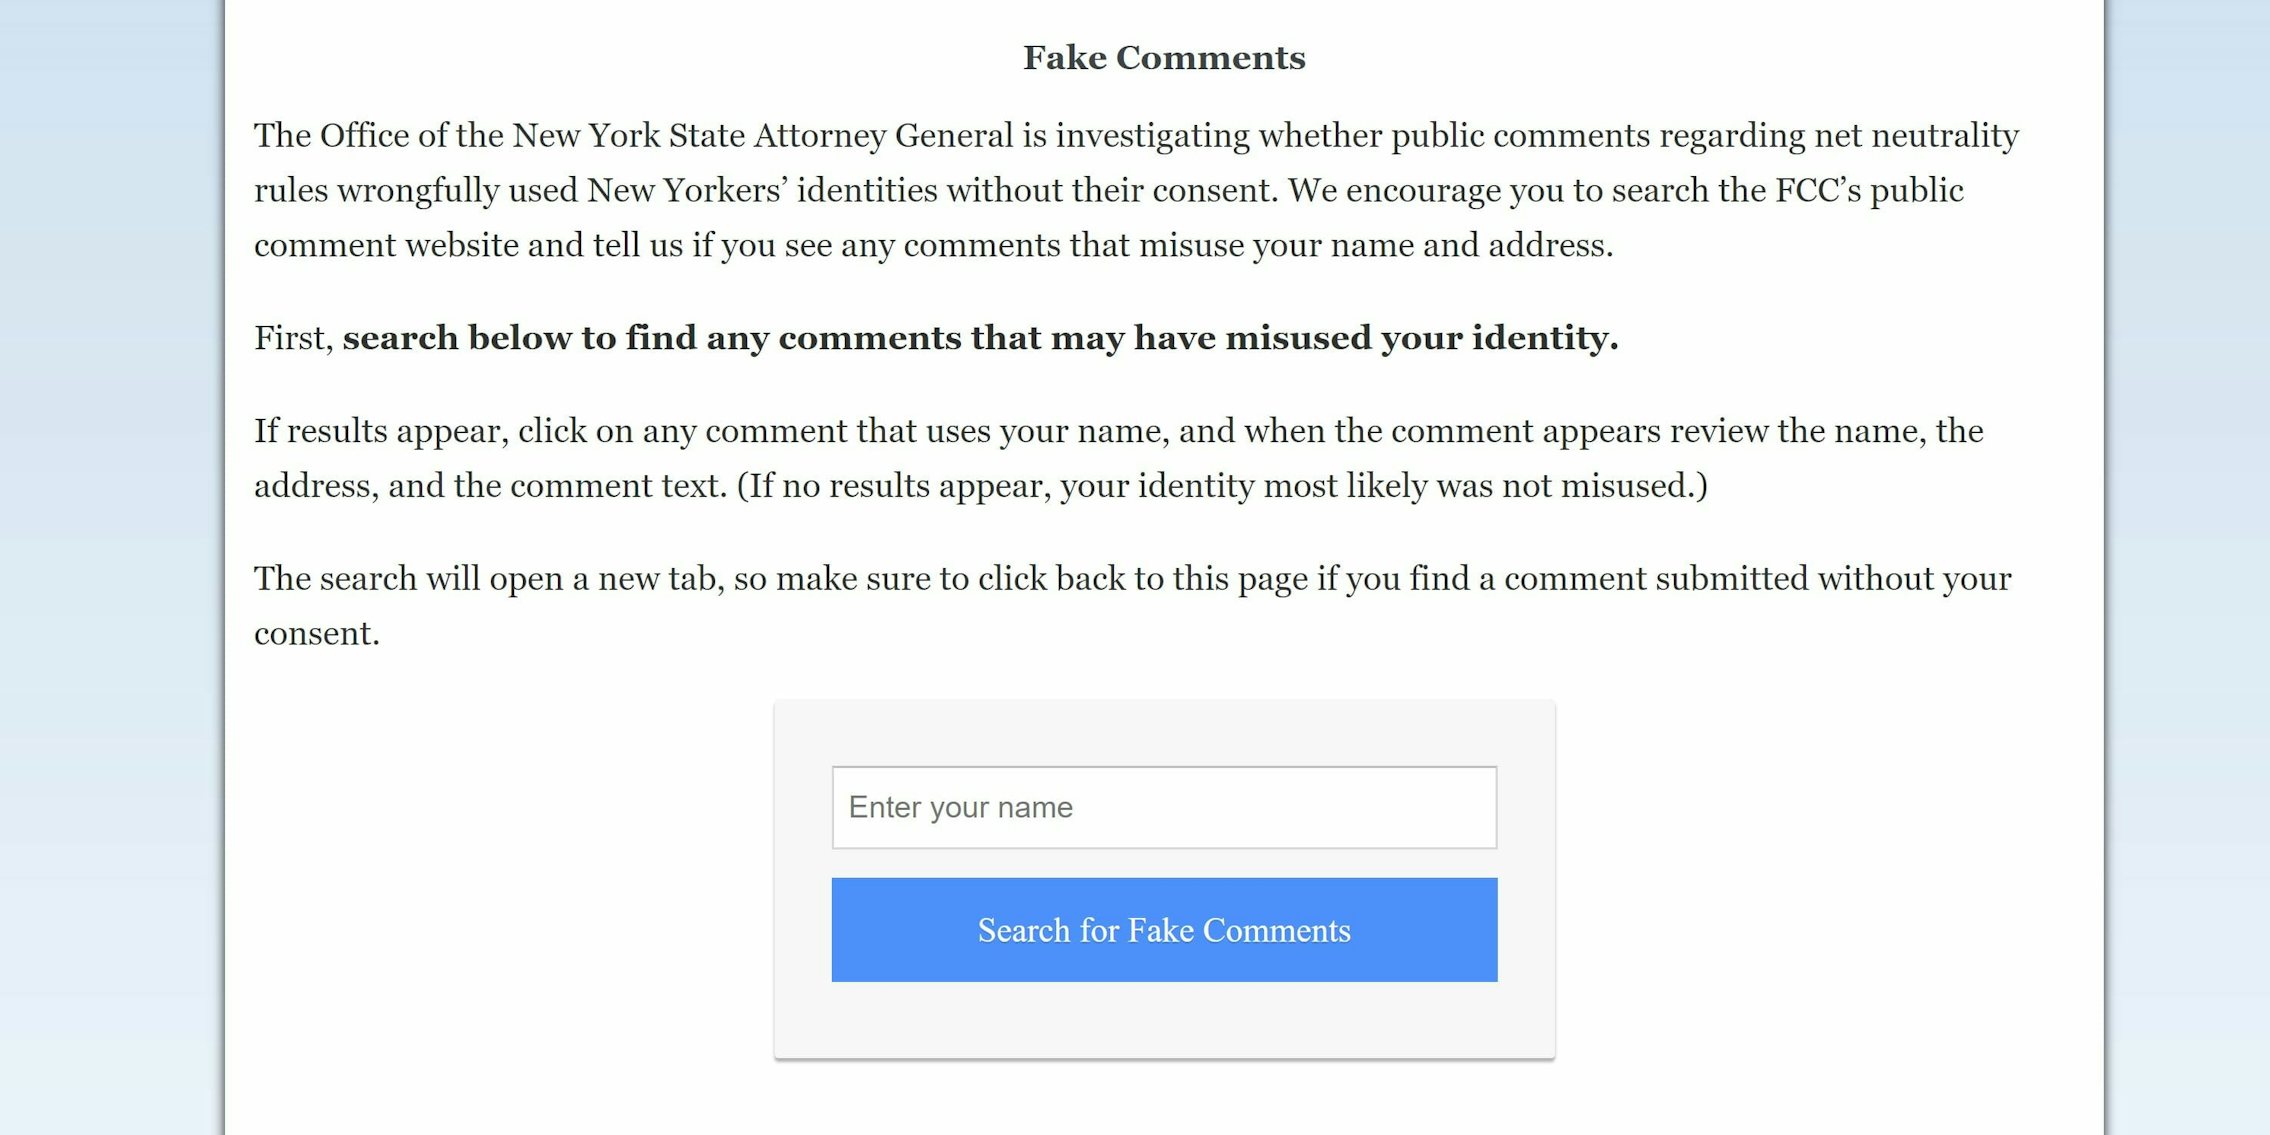 fcc fake comments net neutrality tool